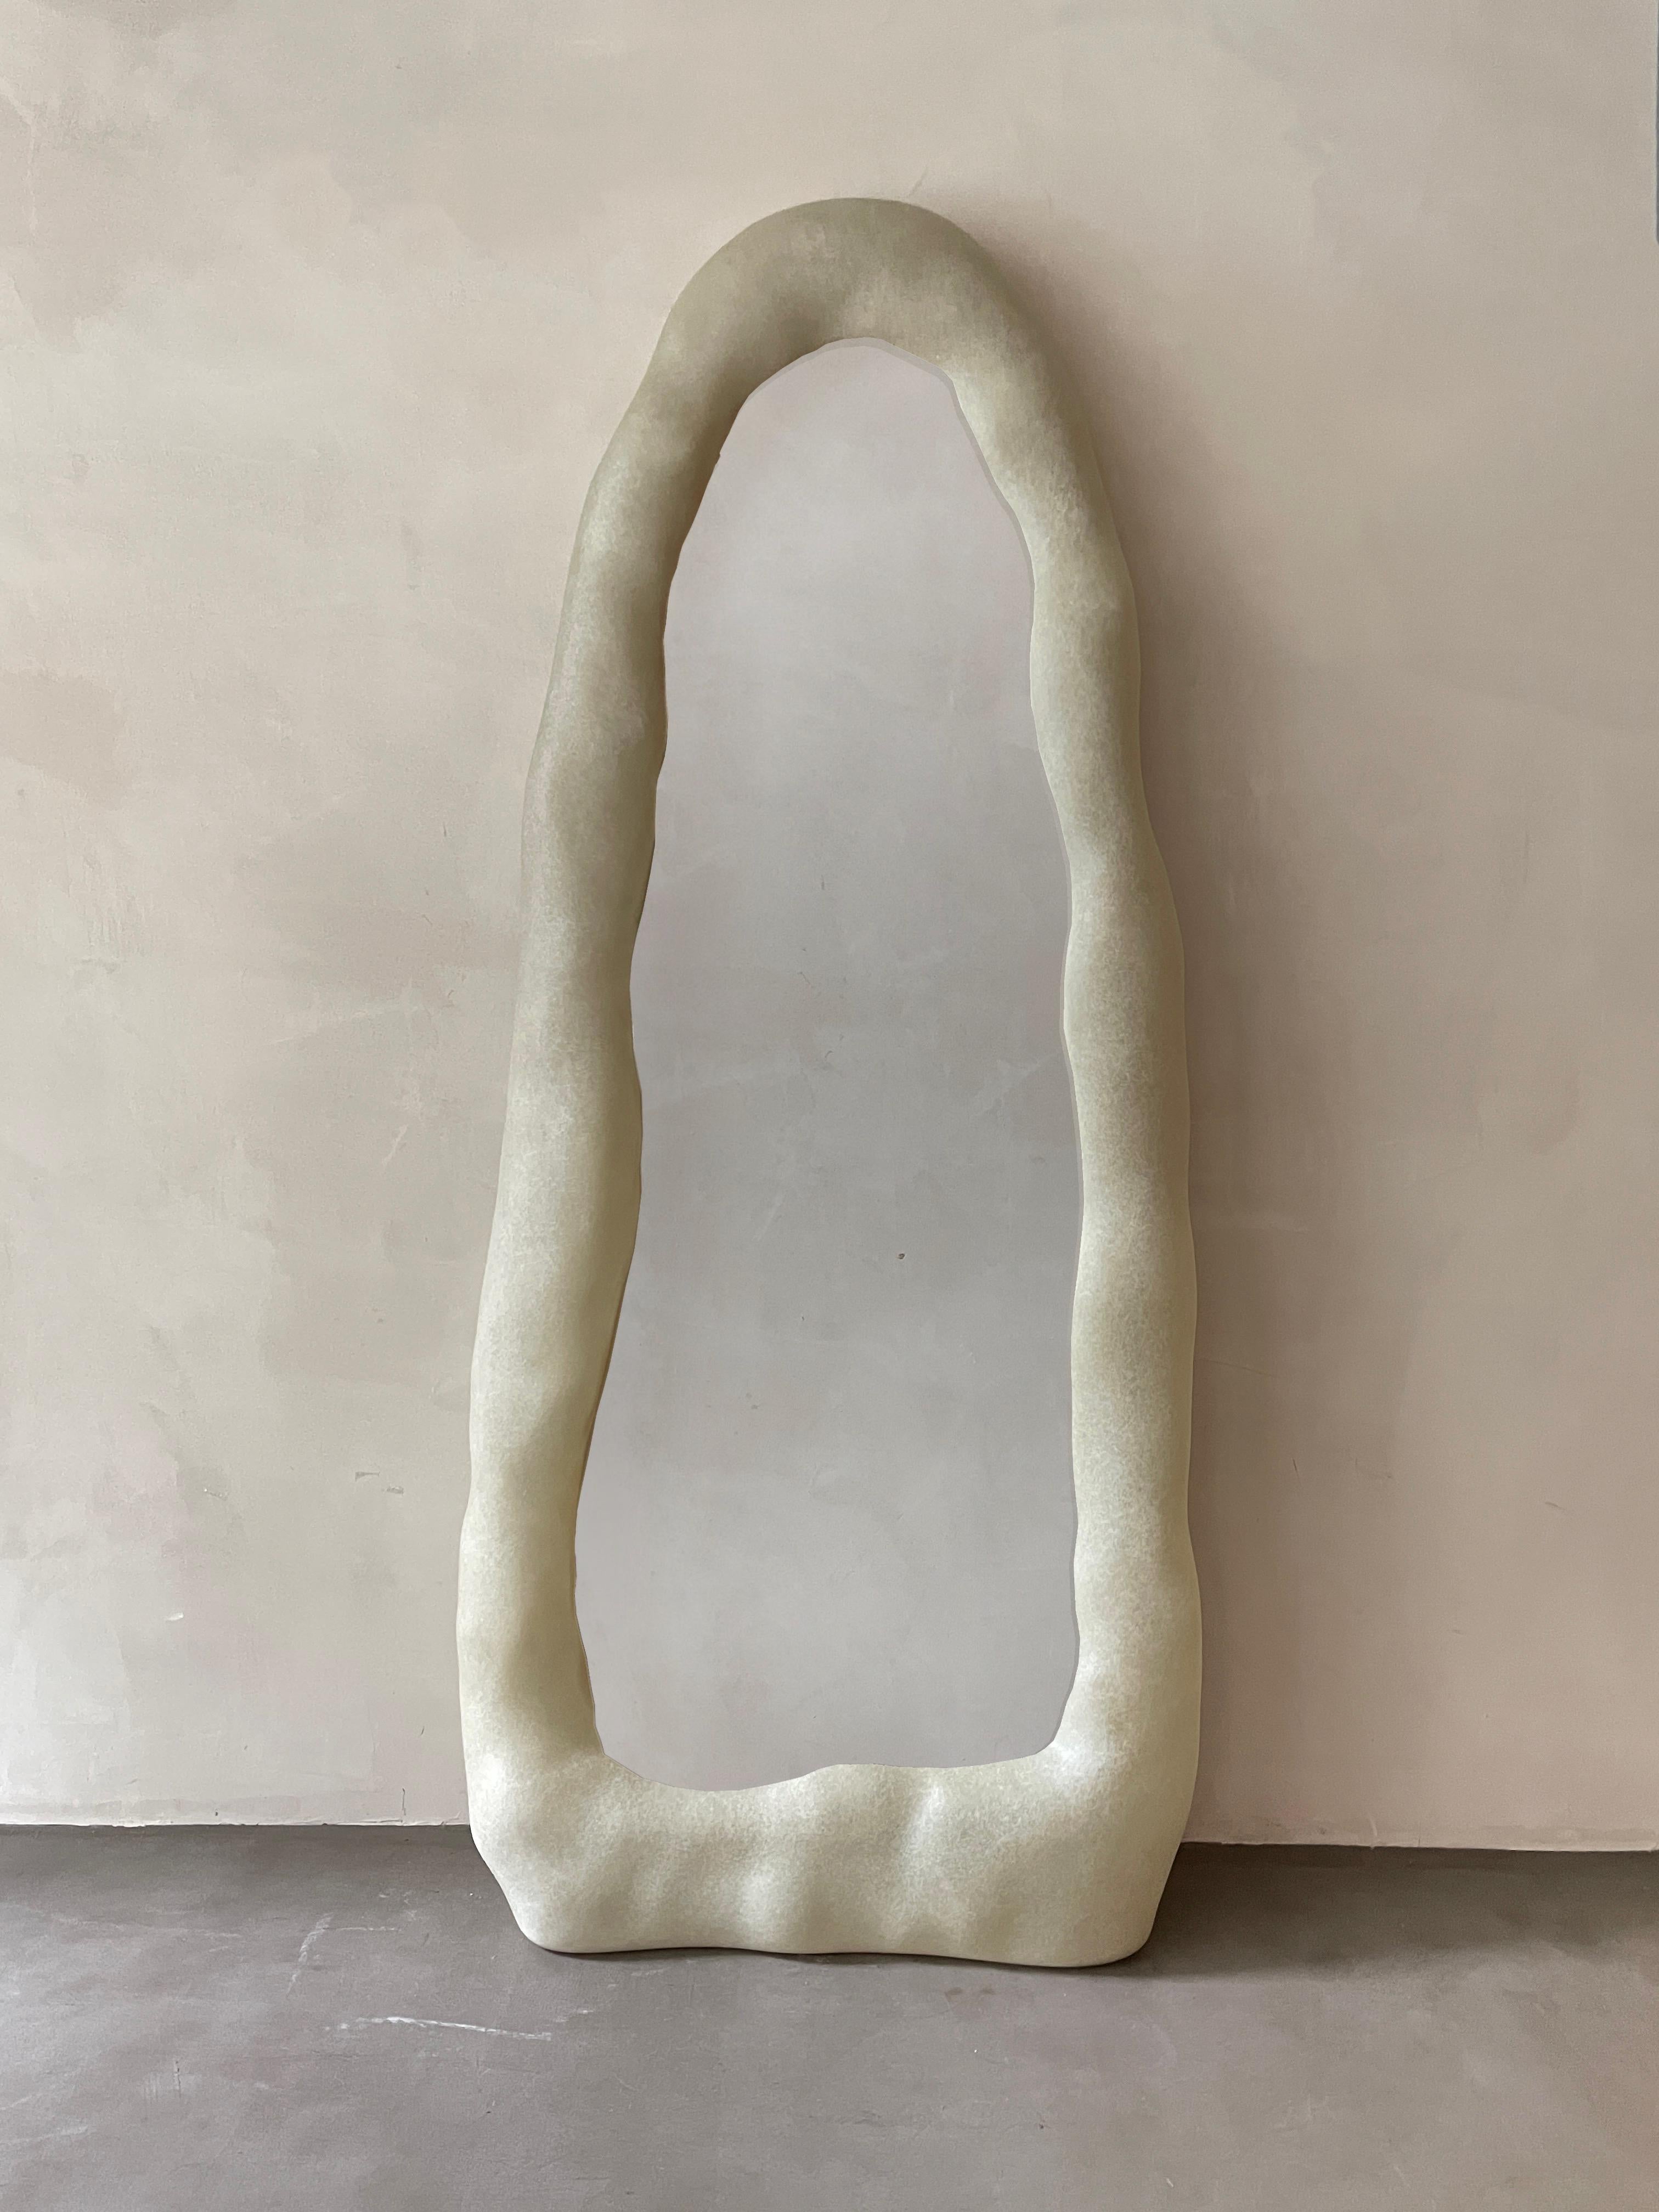 Knead mirror by kar
Materials: Fiberglass.
Dimensions: W 80 x D 22 x H 193 cm.

Knead mirror preserves the handmade traces of clay-kneading, and the hand-polished
texture captures the aesthetic and emotion of creation. The mirror is narrowed from